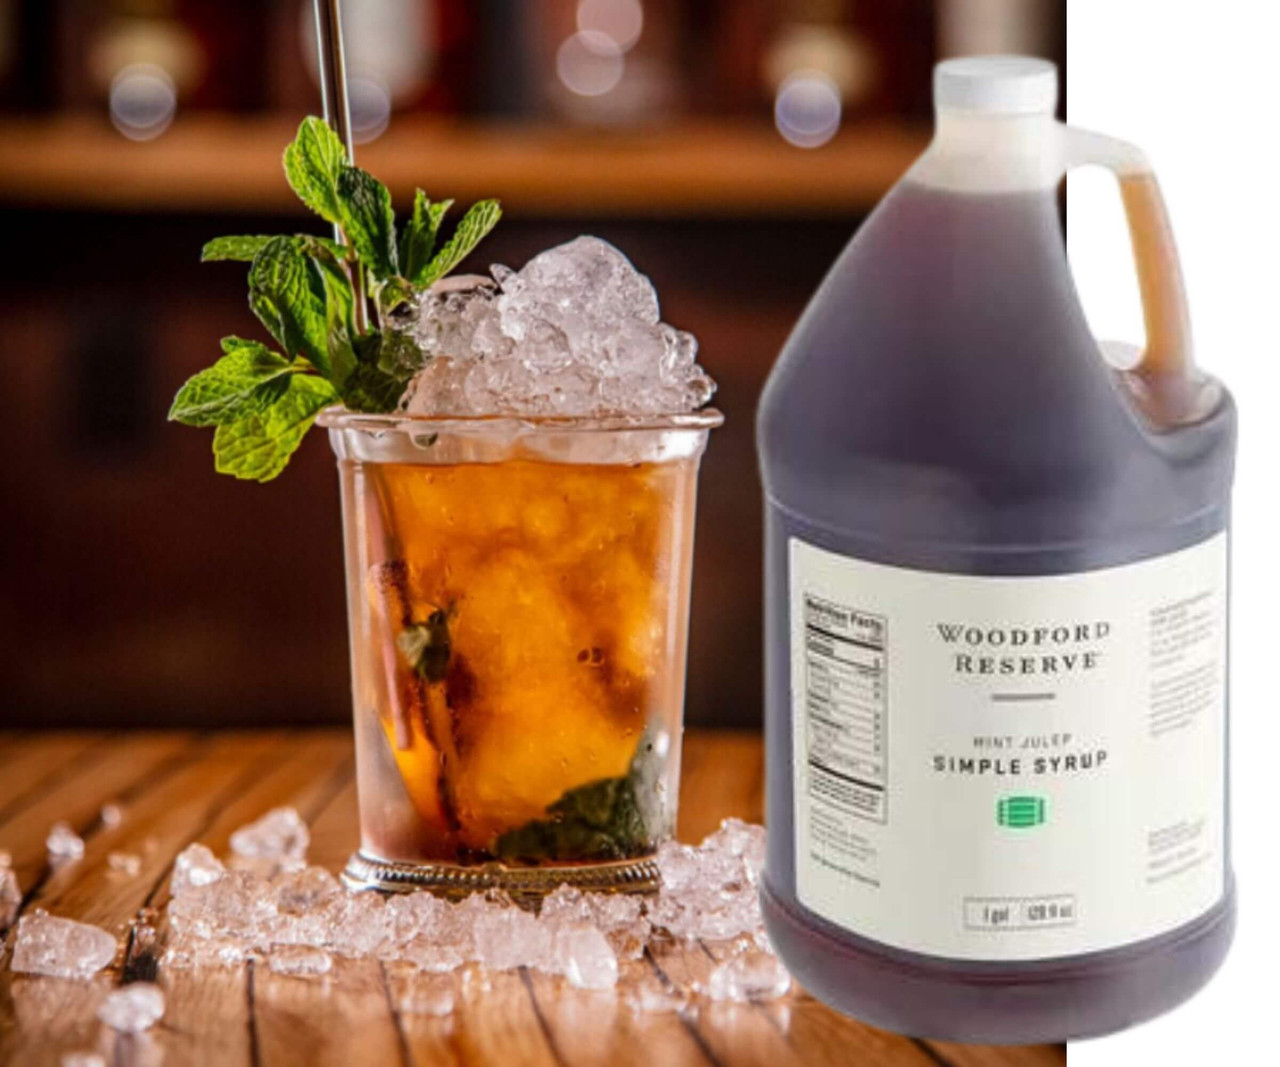 WOODFORD RESERVE Woodford Reserve Mint Julep Simple Syrup | 1 Gallon - Elevate Your Cocktails with Classic Southern Flavor